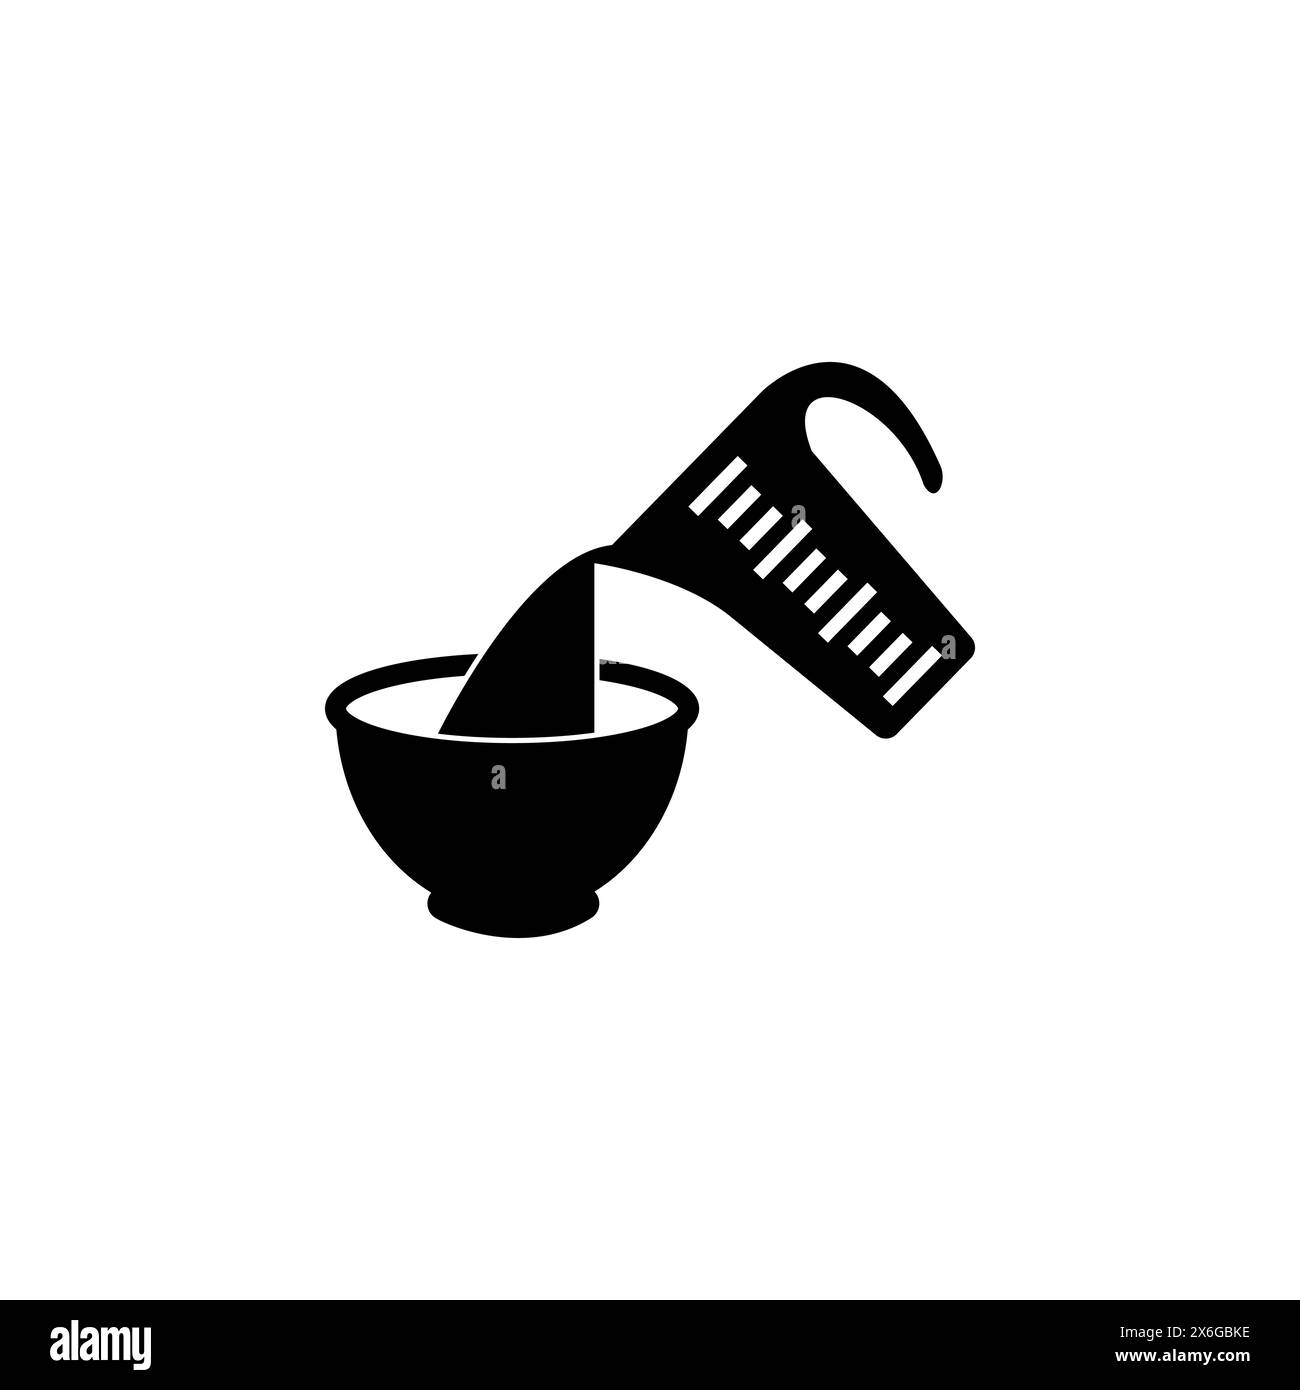 Kettle Pour Hot Water on Dish flat vector icon. Simple solid symbol isolated on white background. Kettle Pour Hot Water on Dish sign design template f Stock Vector